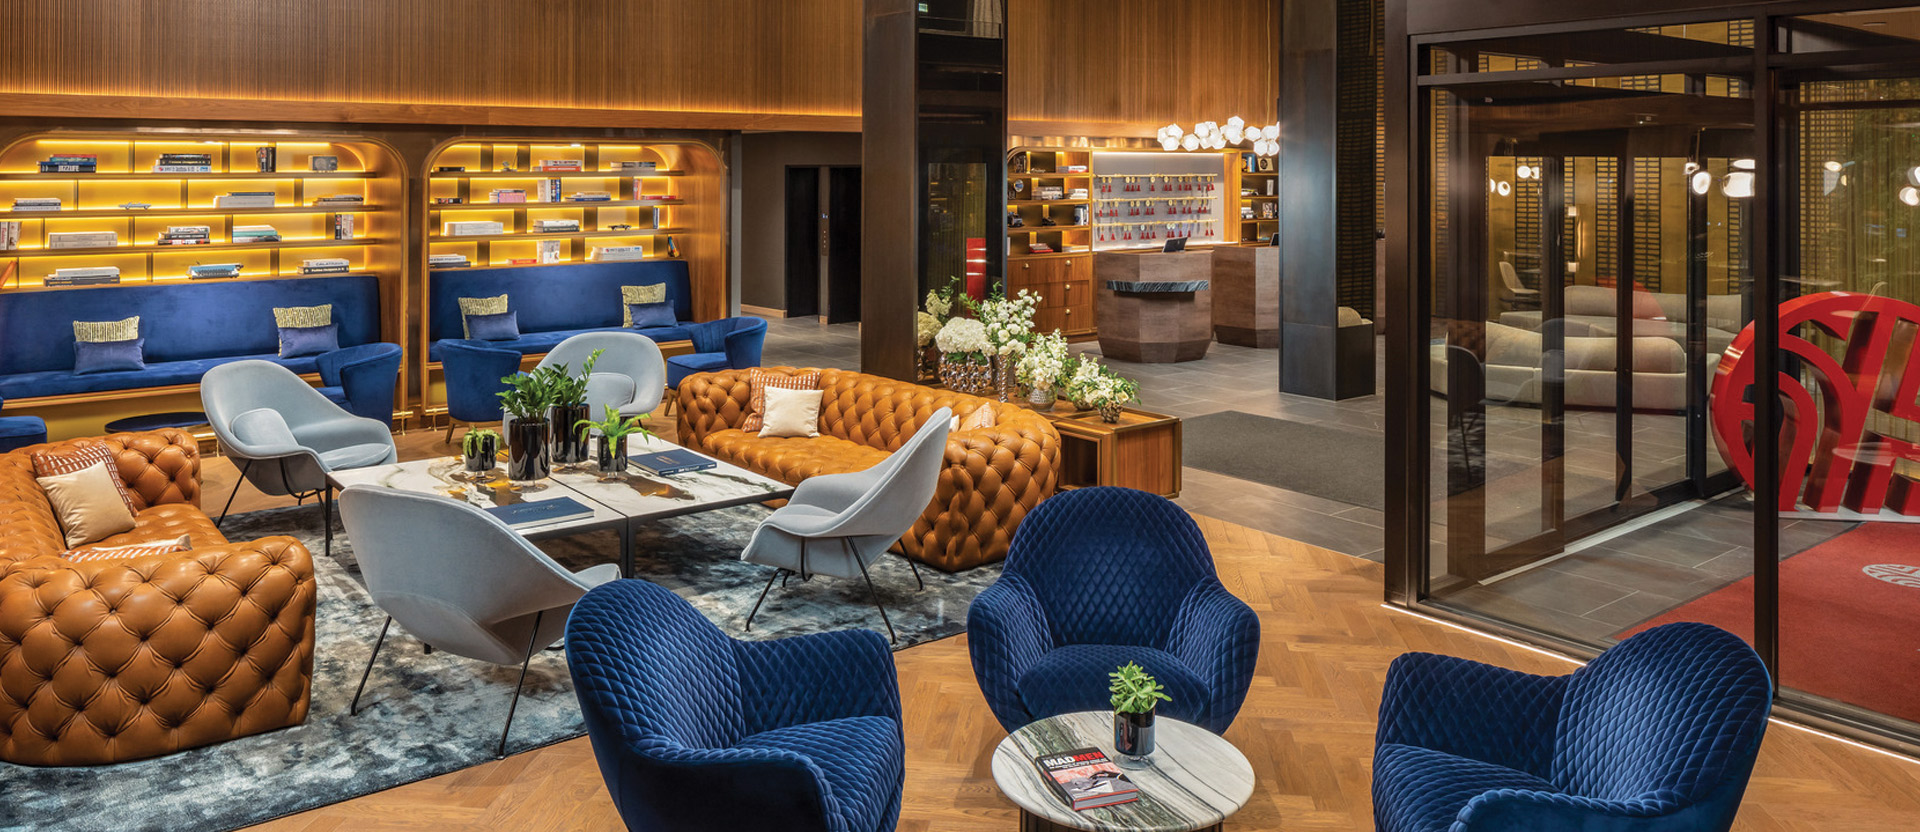 Modern hotel lobby featuring an eclectic mix of furniture styles, with deep blue velvet chairs, caramel button-tufted sofas, and a bold red sculptural seat. A structured, tiered black chandelier hangs overhead, contrasting the warm wooden wall panels and honeycomb-style shelving filled with books.